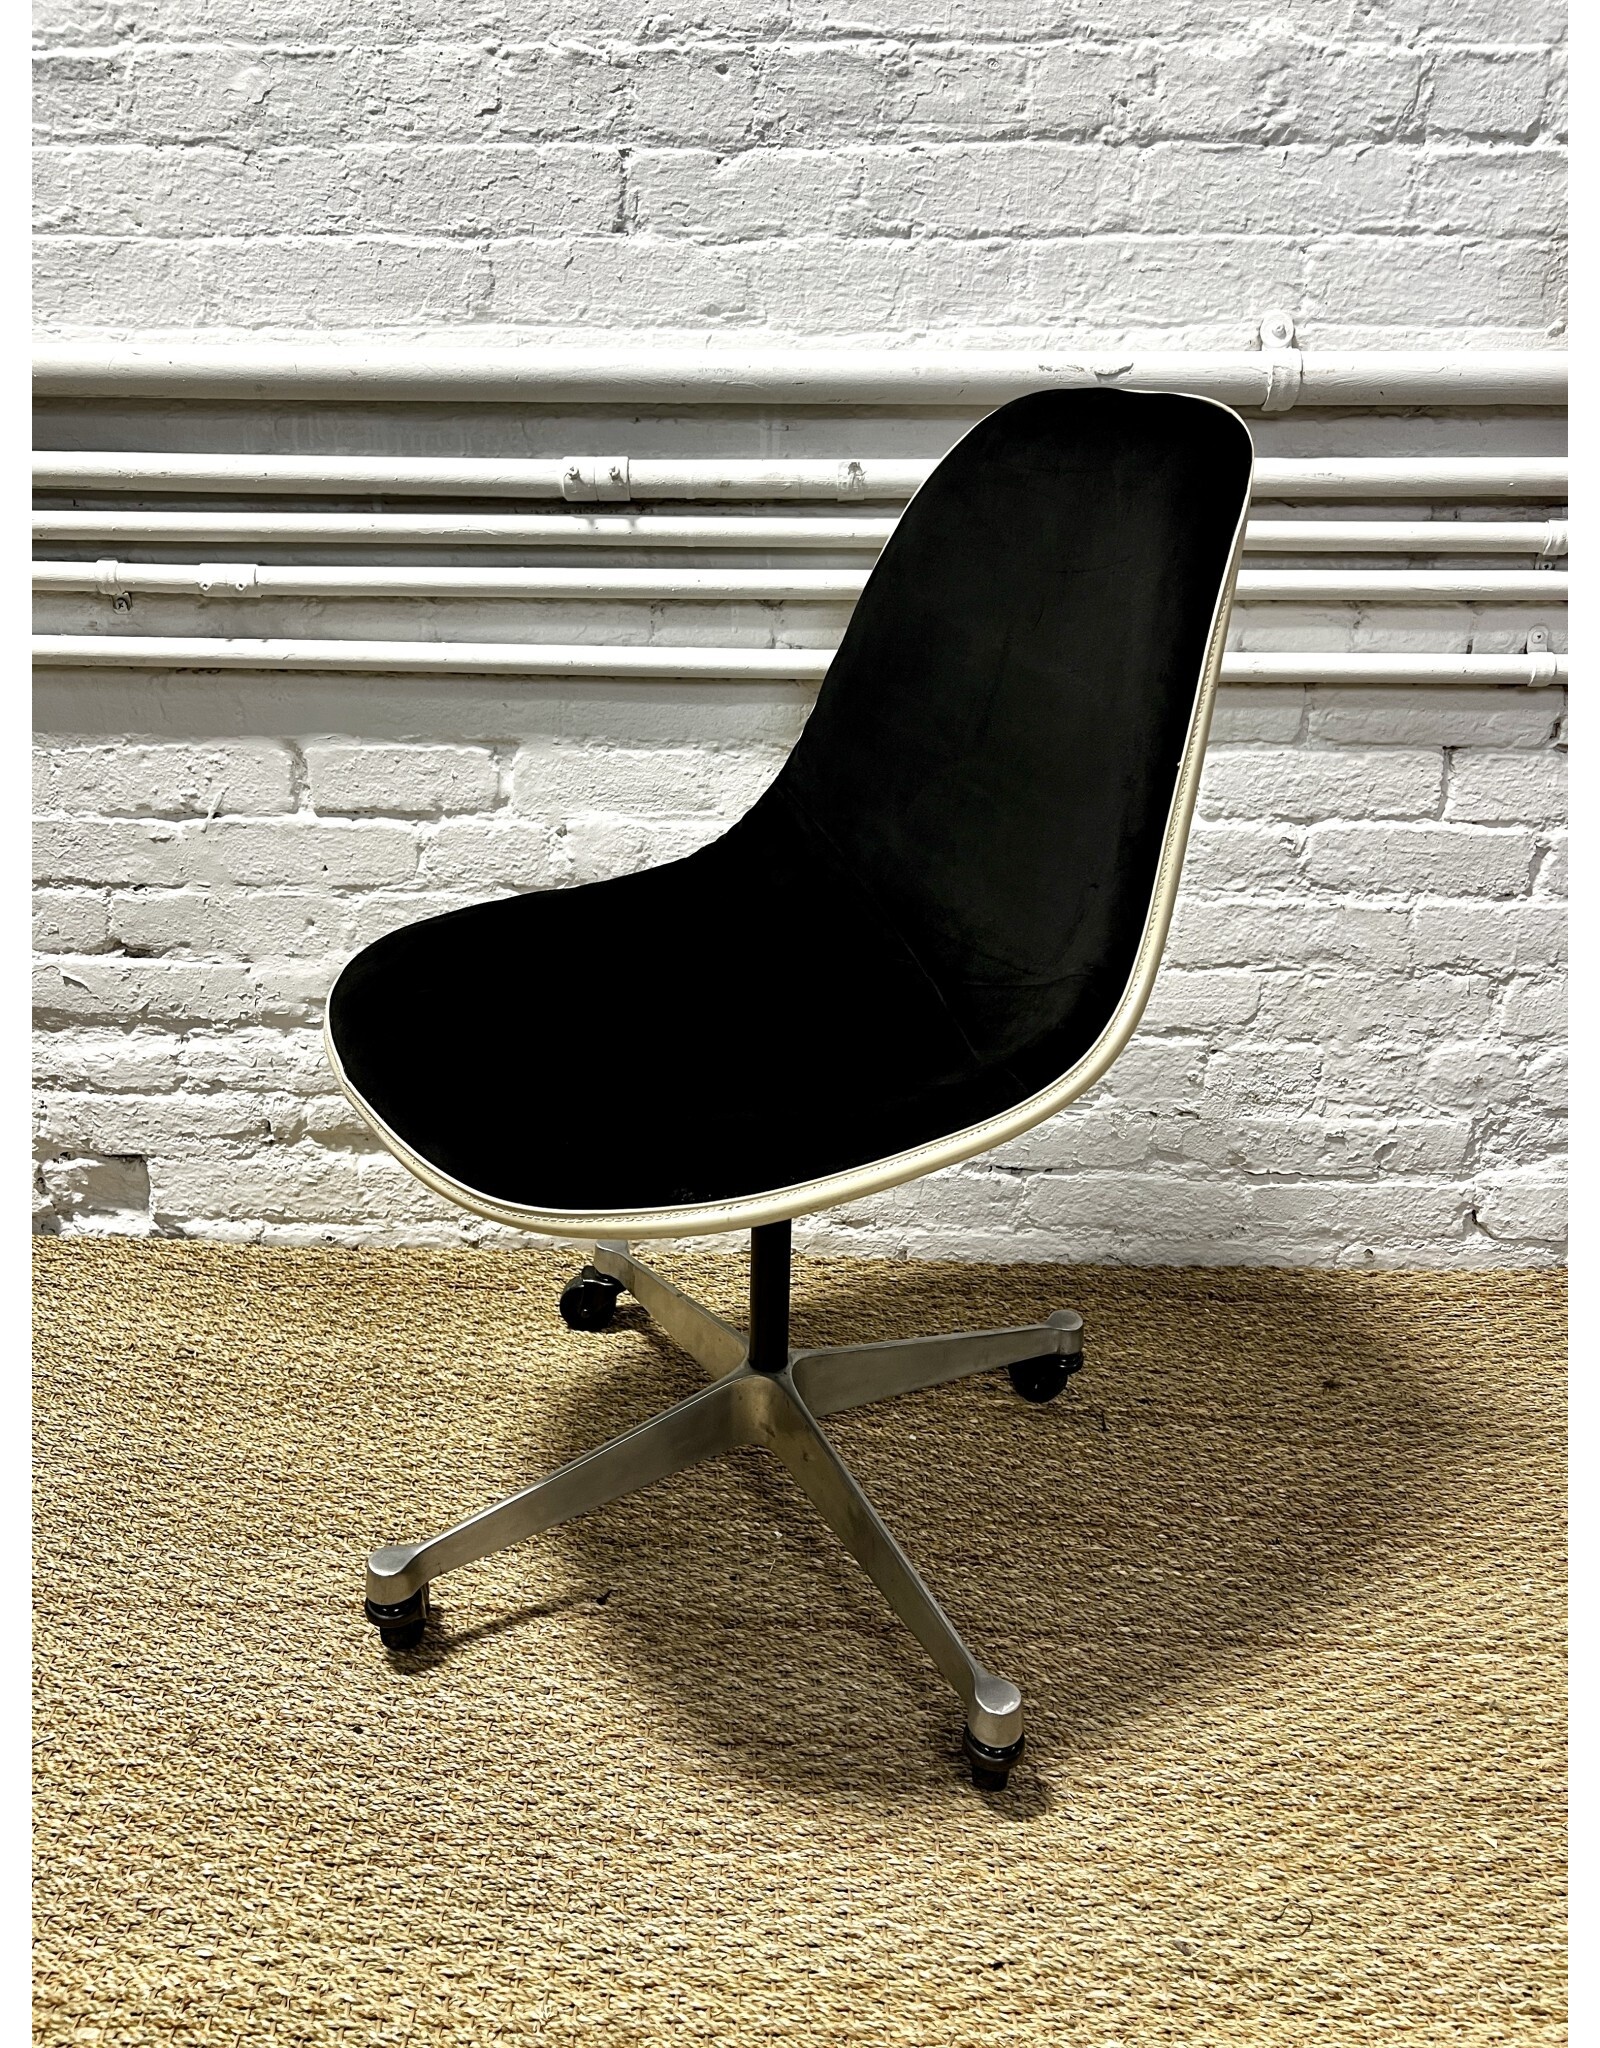 Vintage Charles & Ray Eames PSCC Padded Desk Chair by Herman Miller